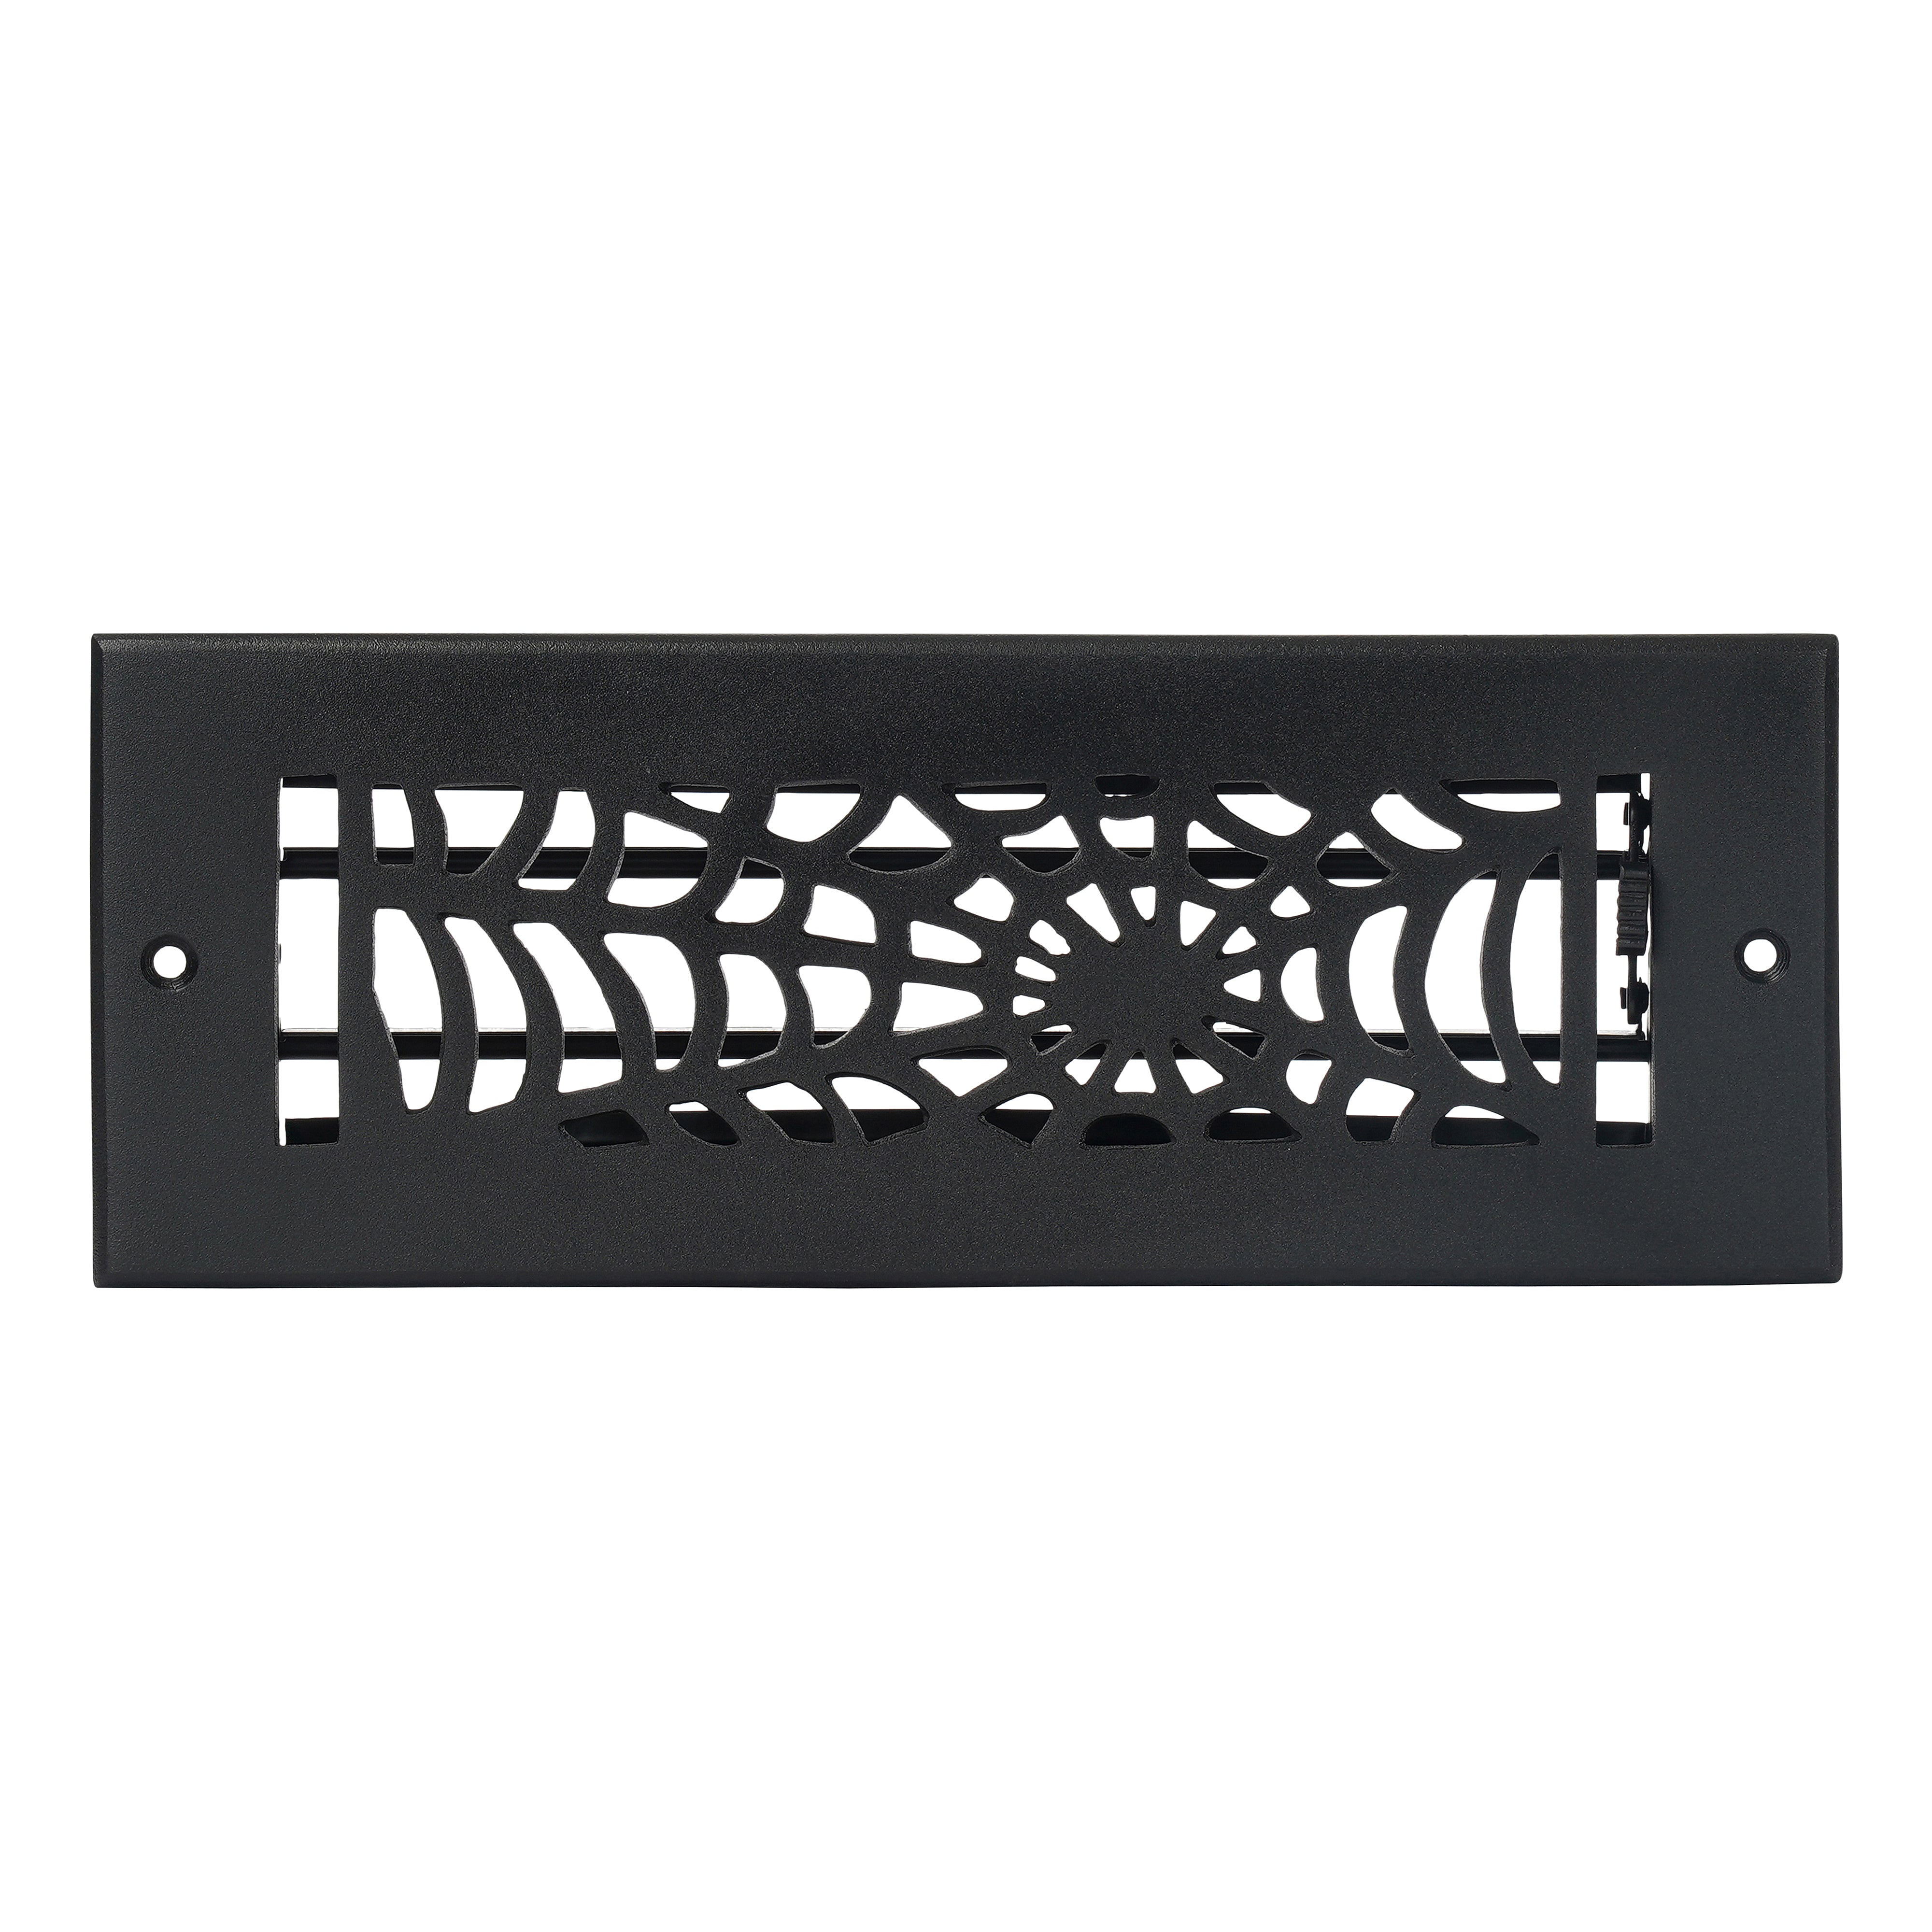 Spooky Gothic Vent cover 3"x 10" Duct Opening (Overall 4-1/2"x 11-3/4") in Spider Web Design | Solid Cast Aluminium Register Cover | Powder Coated